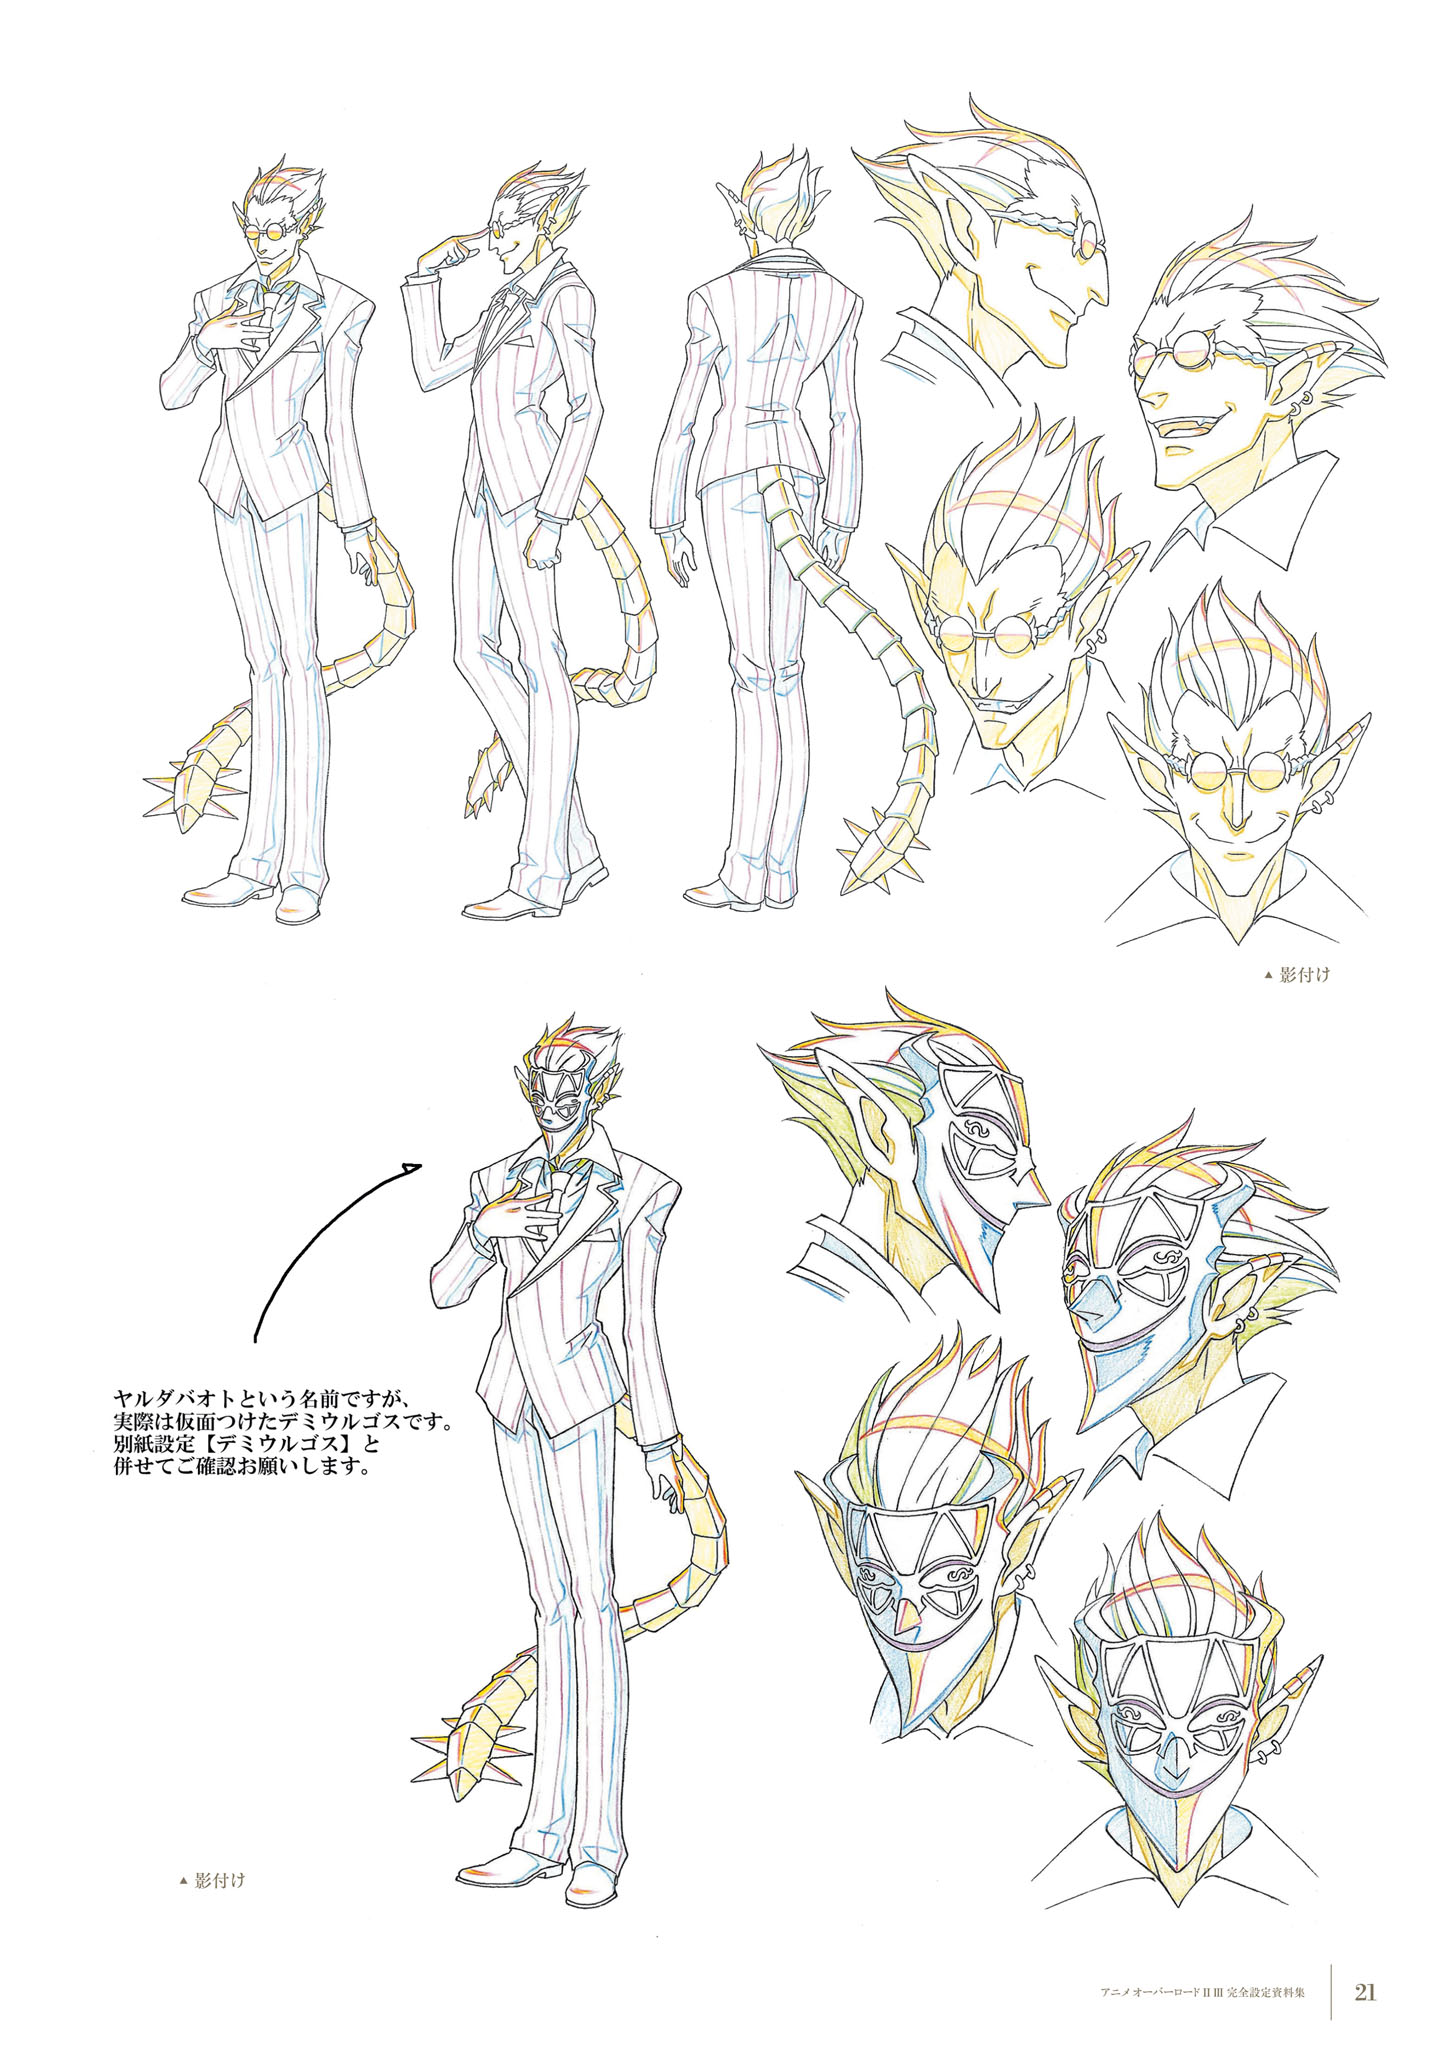 Overlord Demiurge Business Suit Megane Pointy Ears Sketch Tail Yande Re